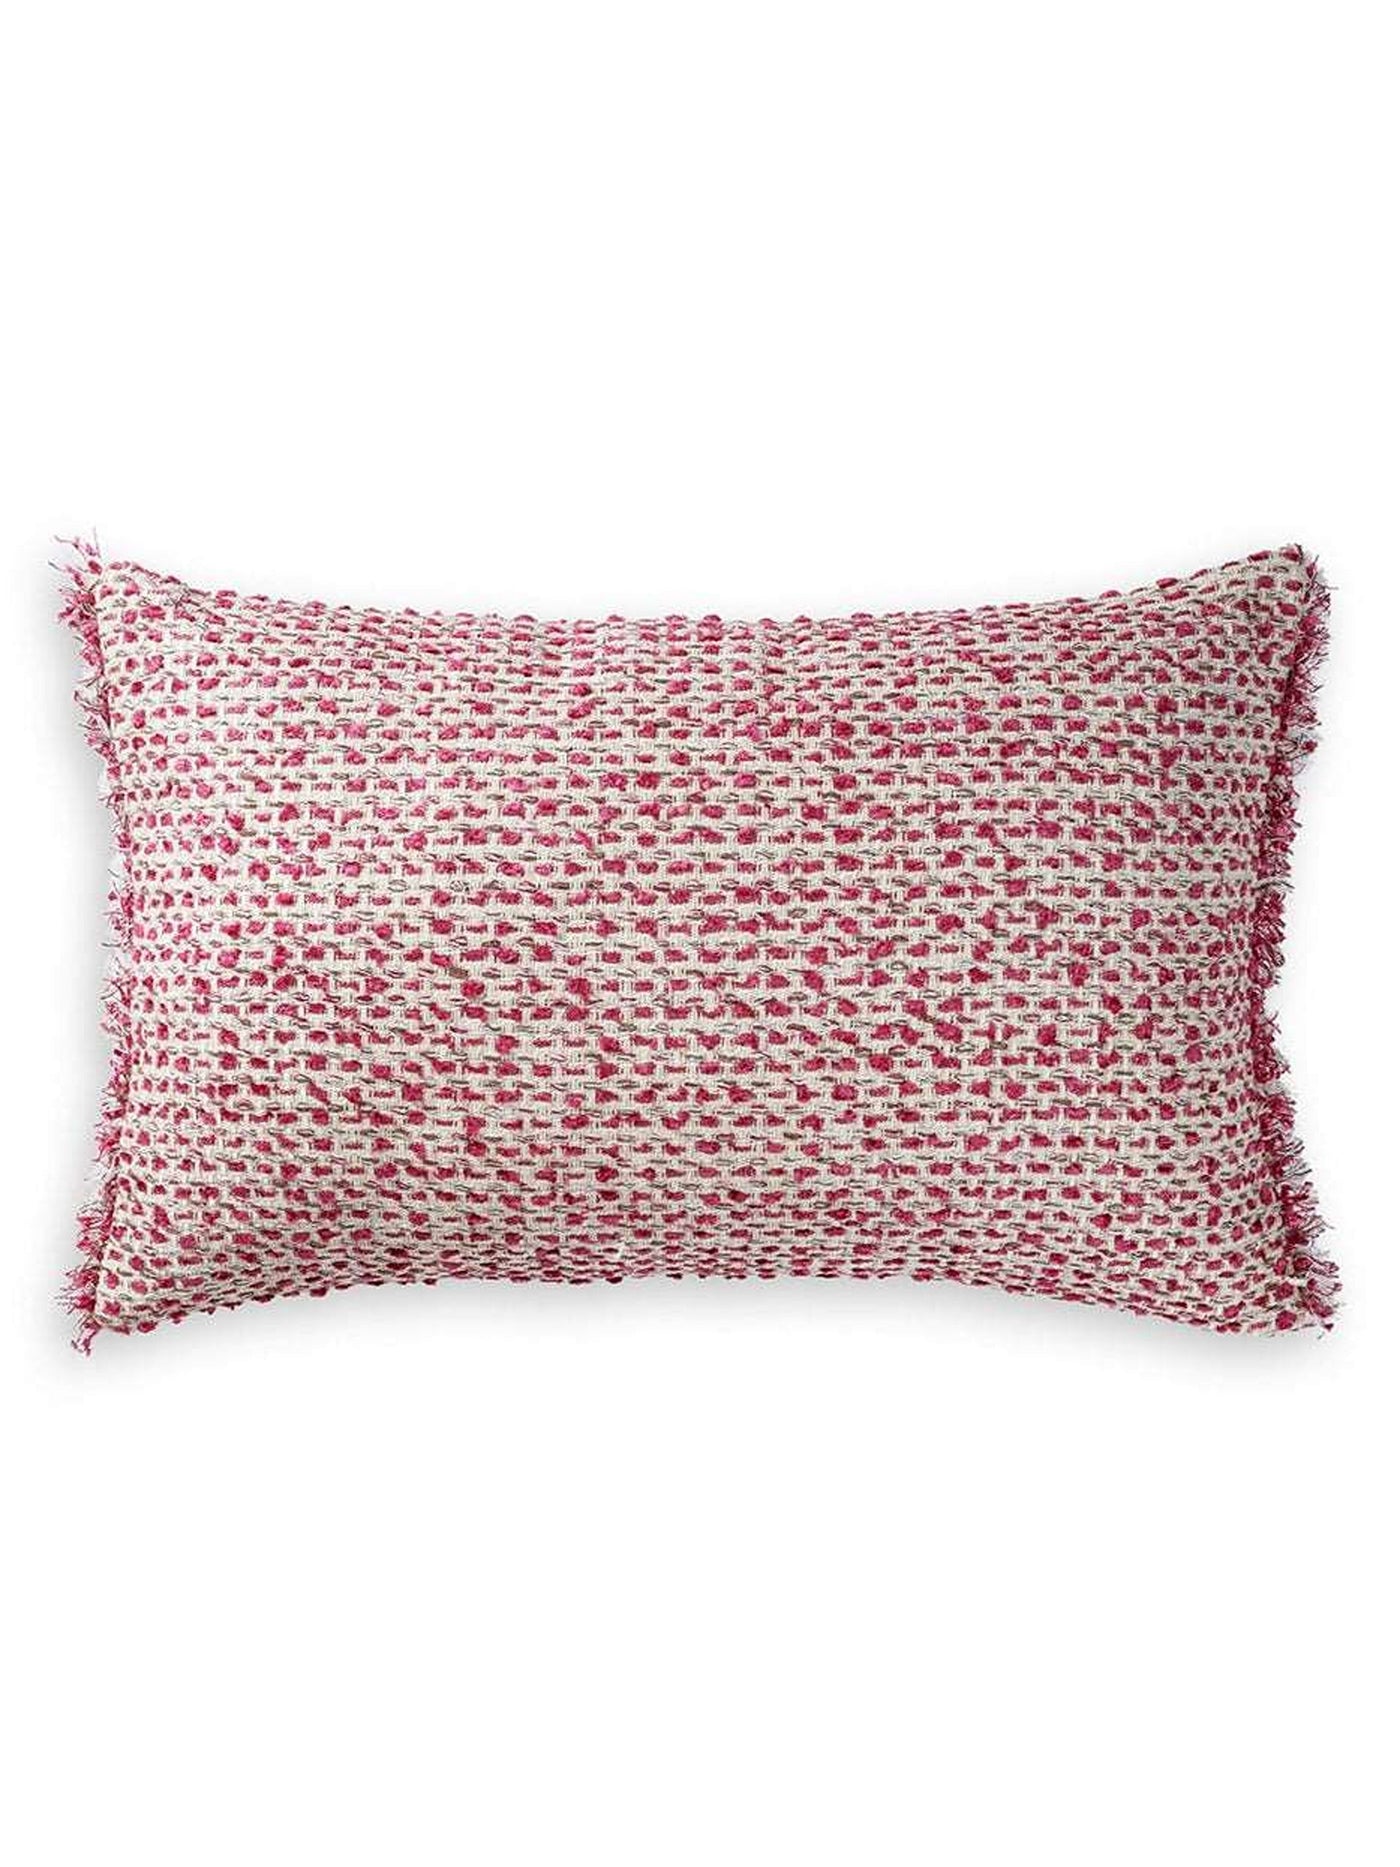 Cushion Cover - Flakes Floral